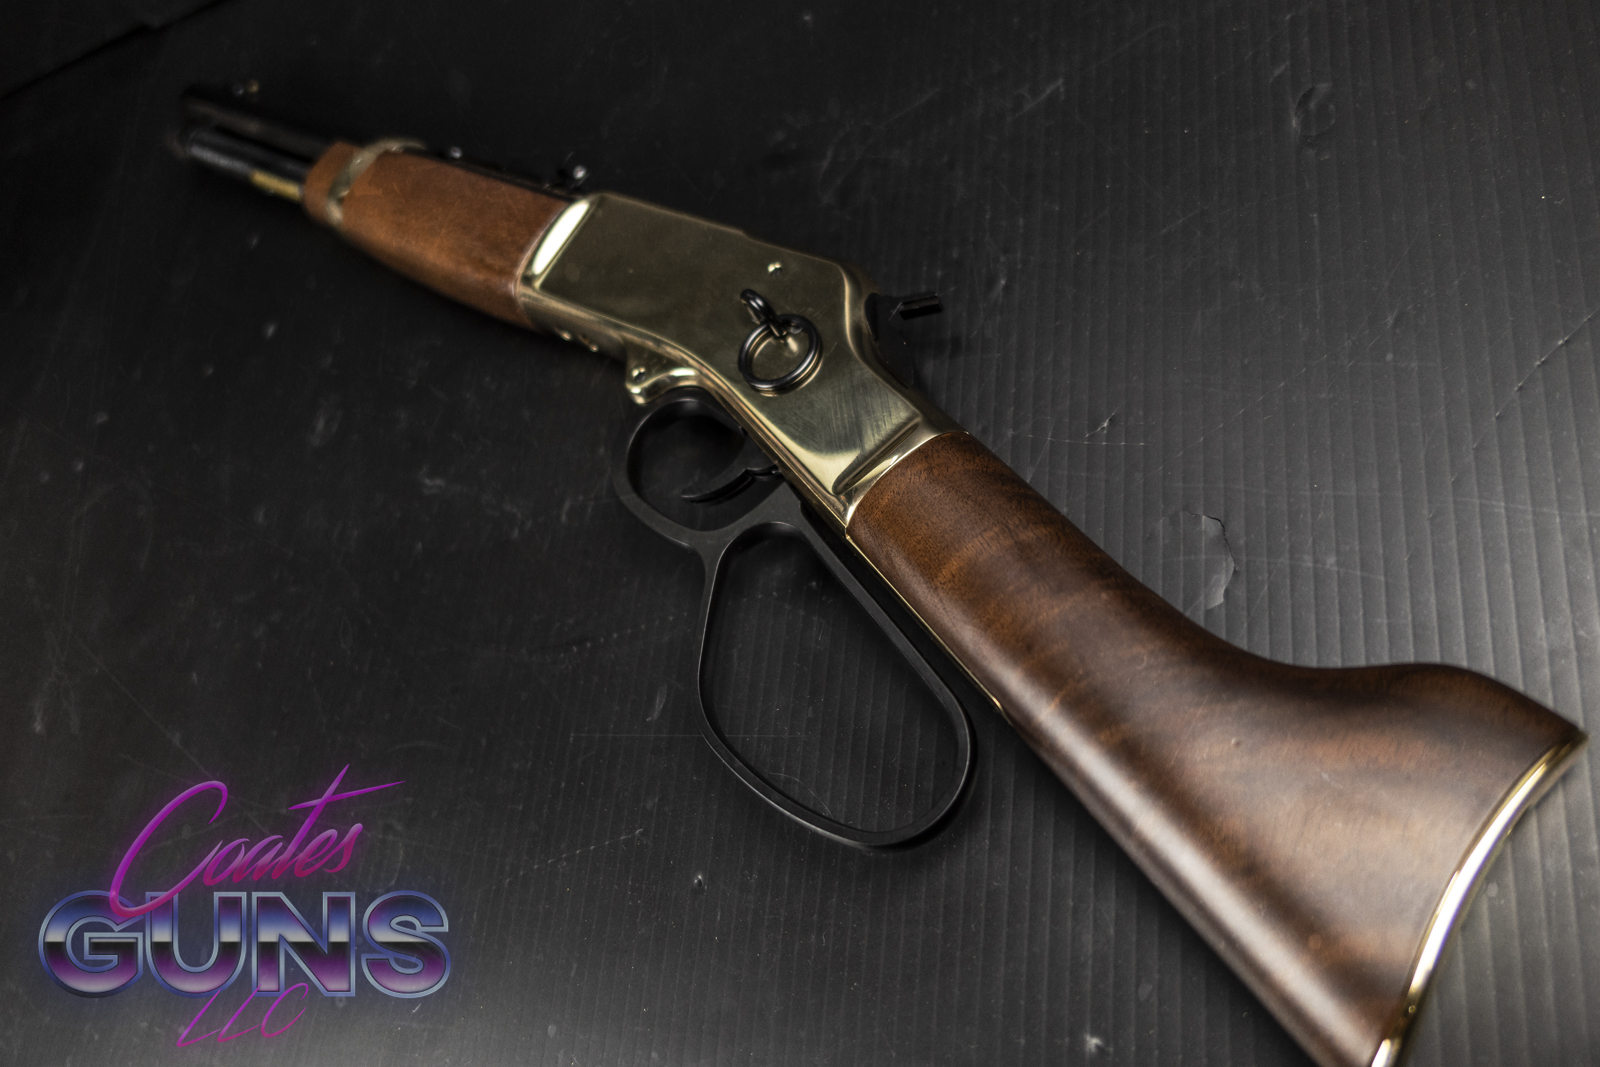 Side Gate Lever Action Rifle